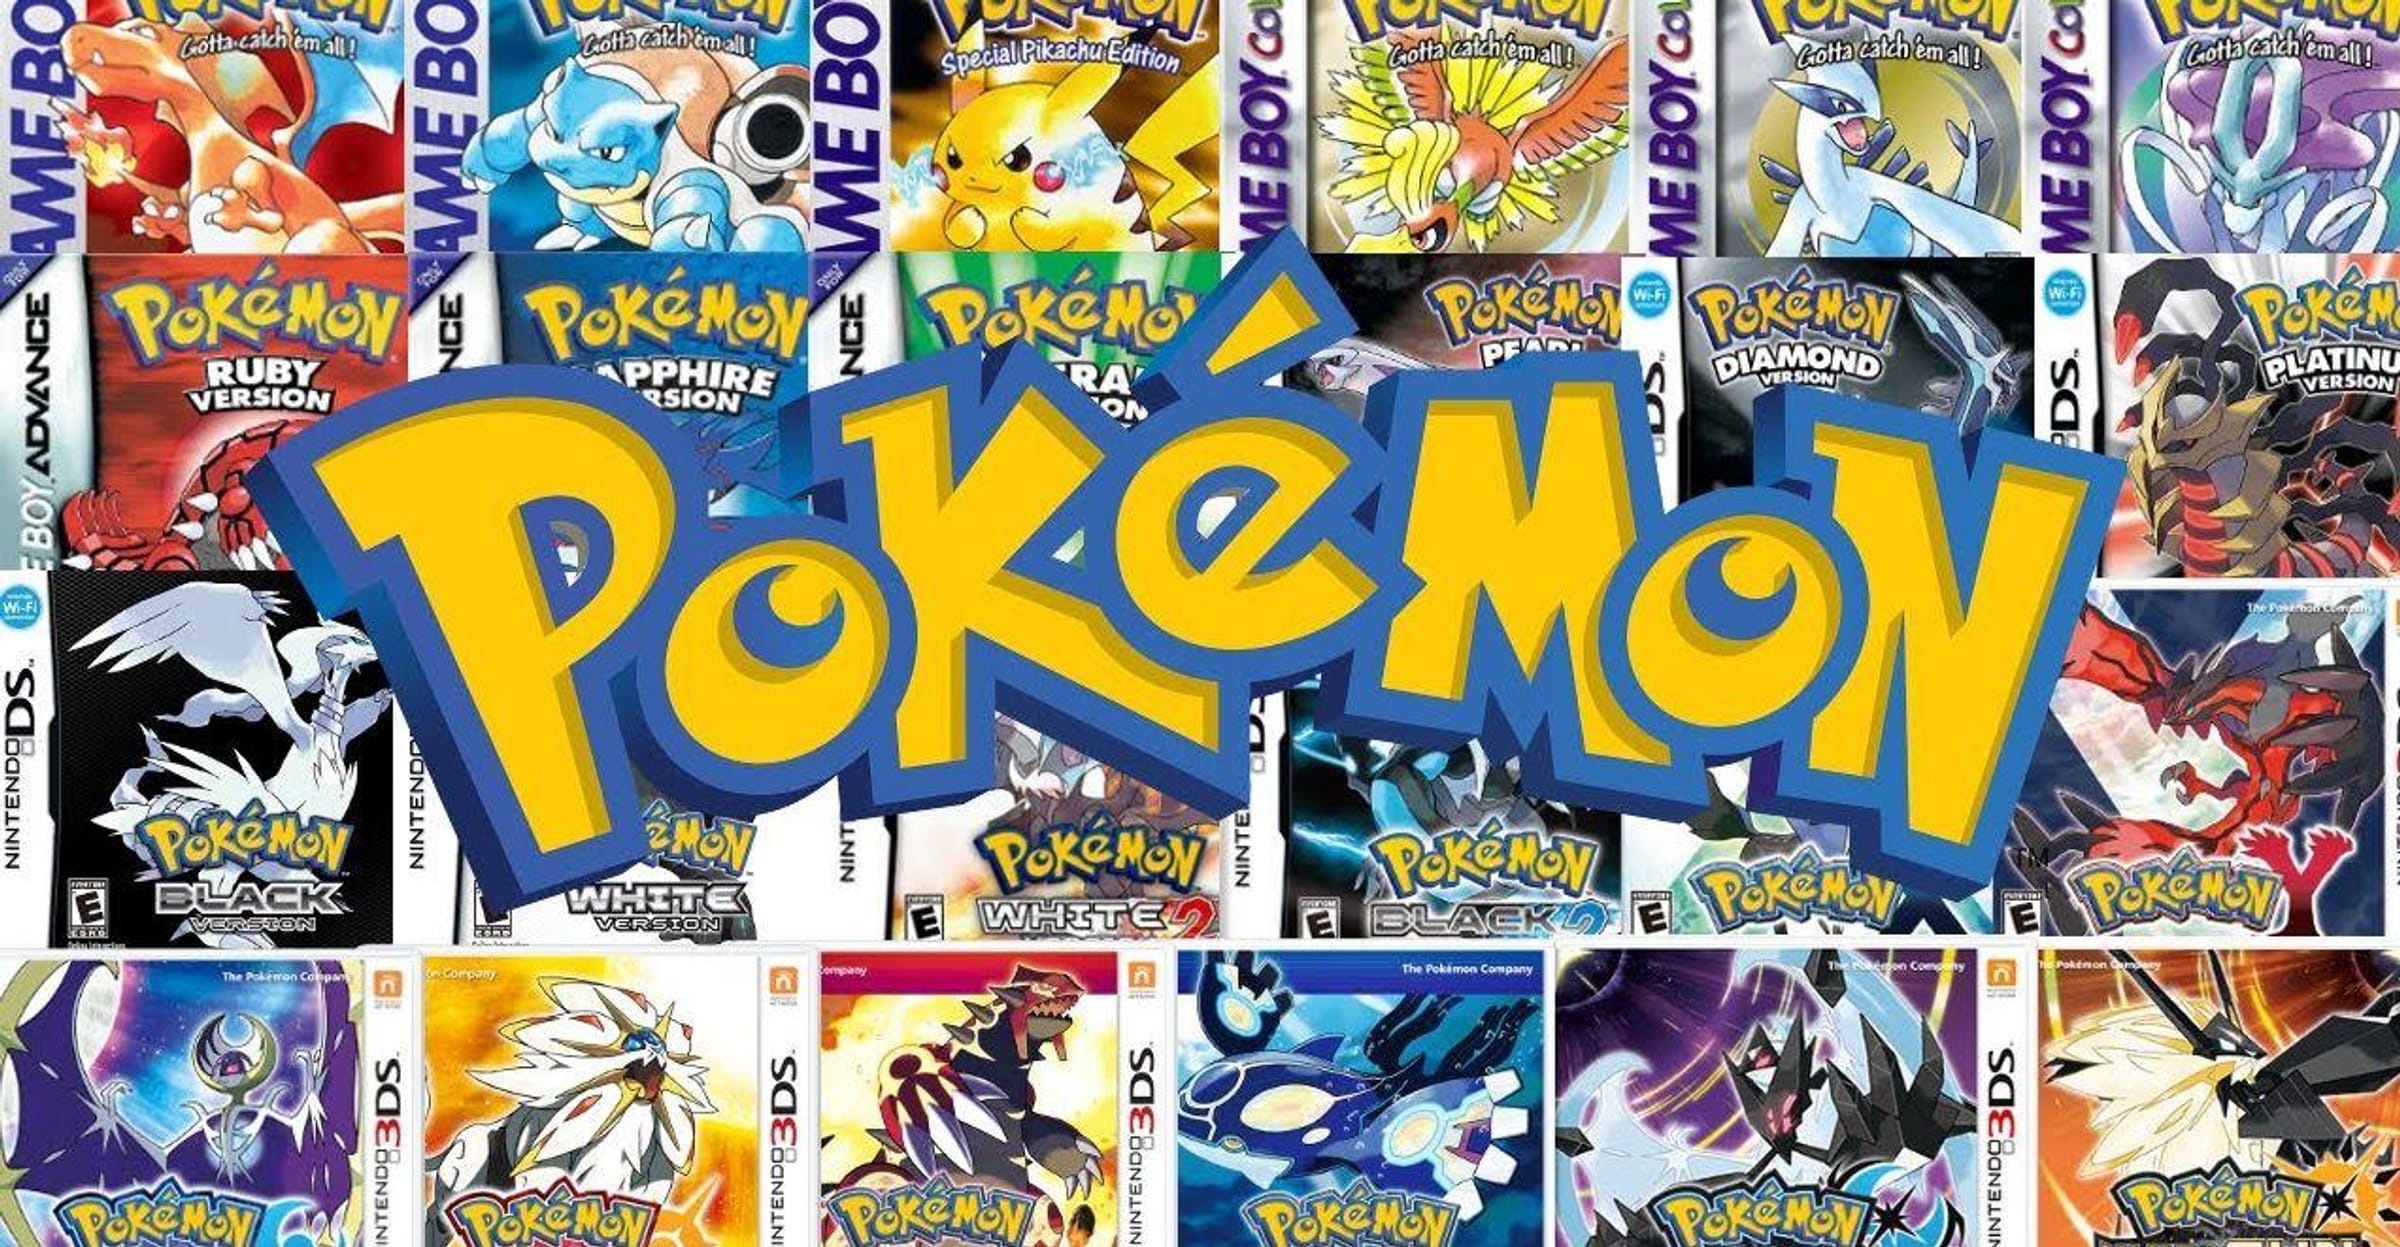 Every Pokémon Game Narrative, Ranked From Best To Worst